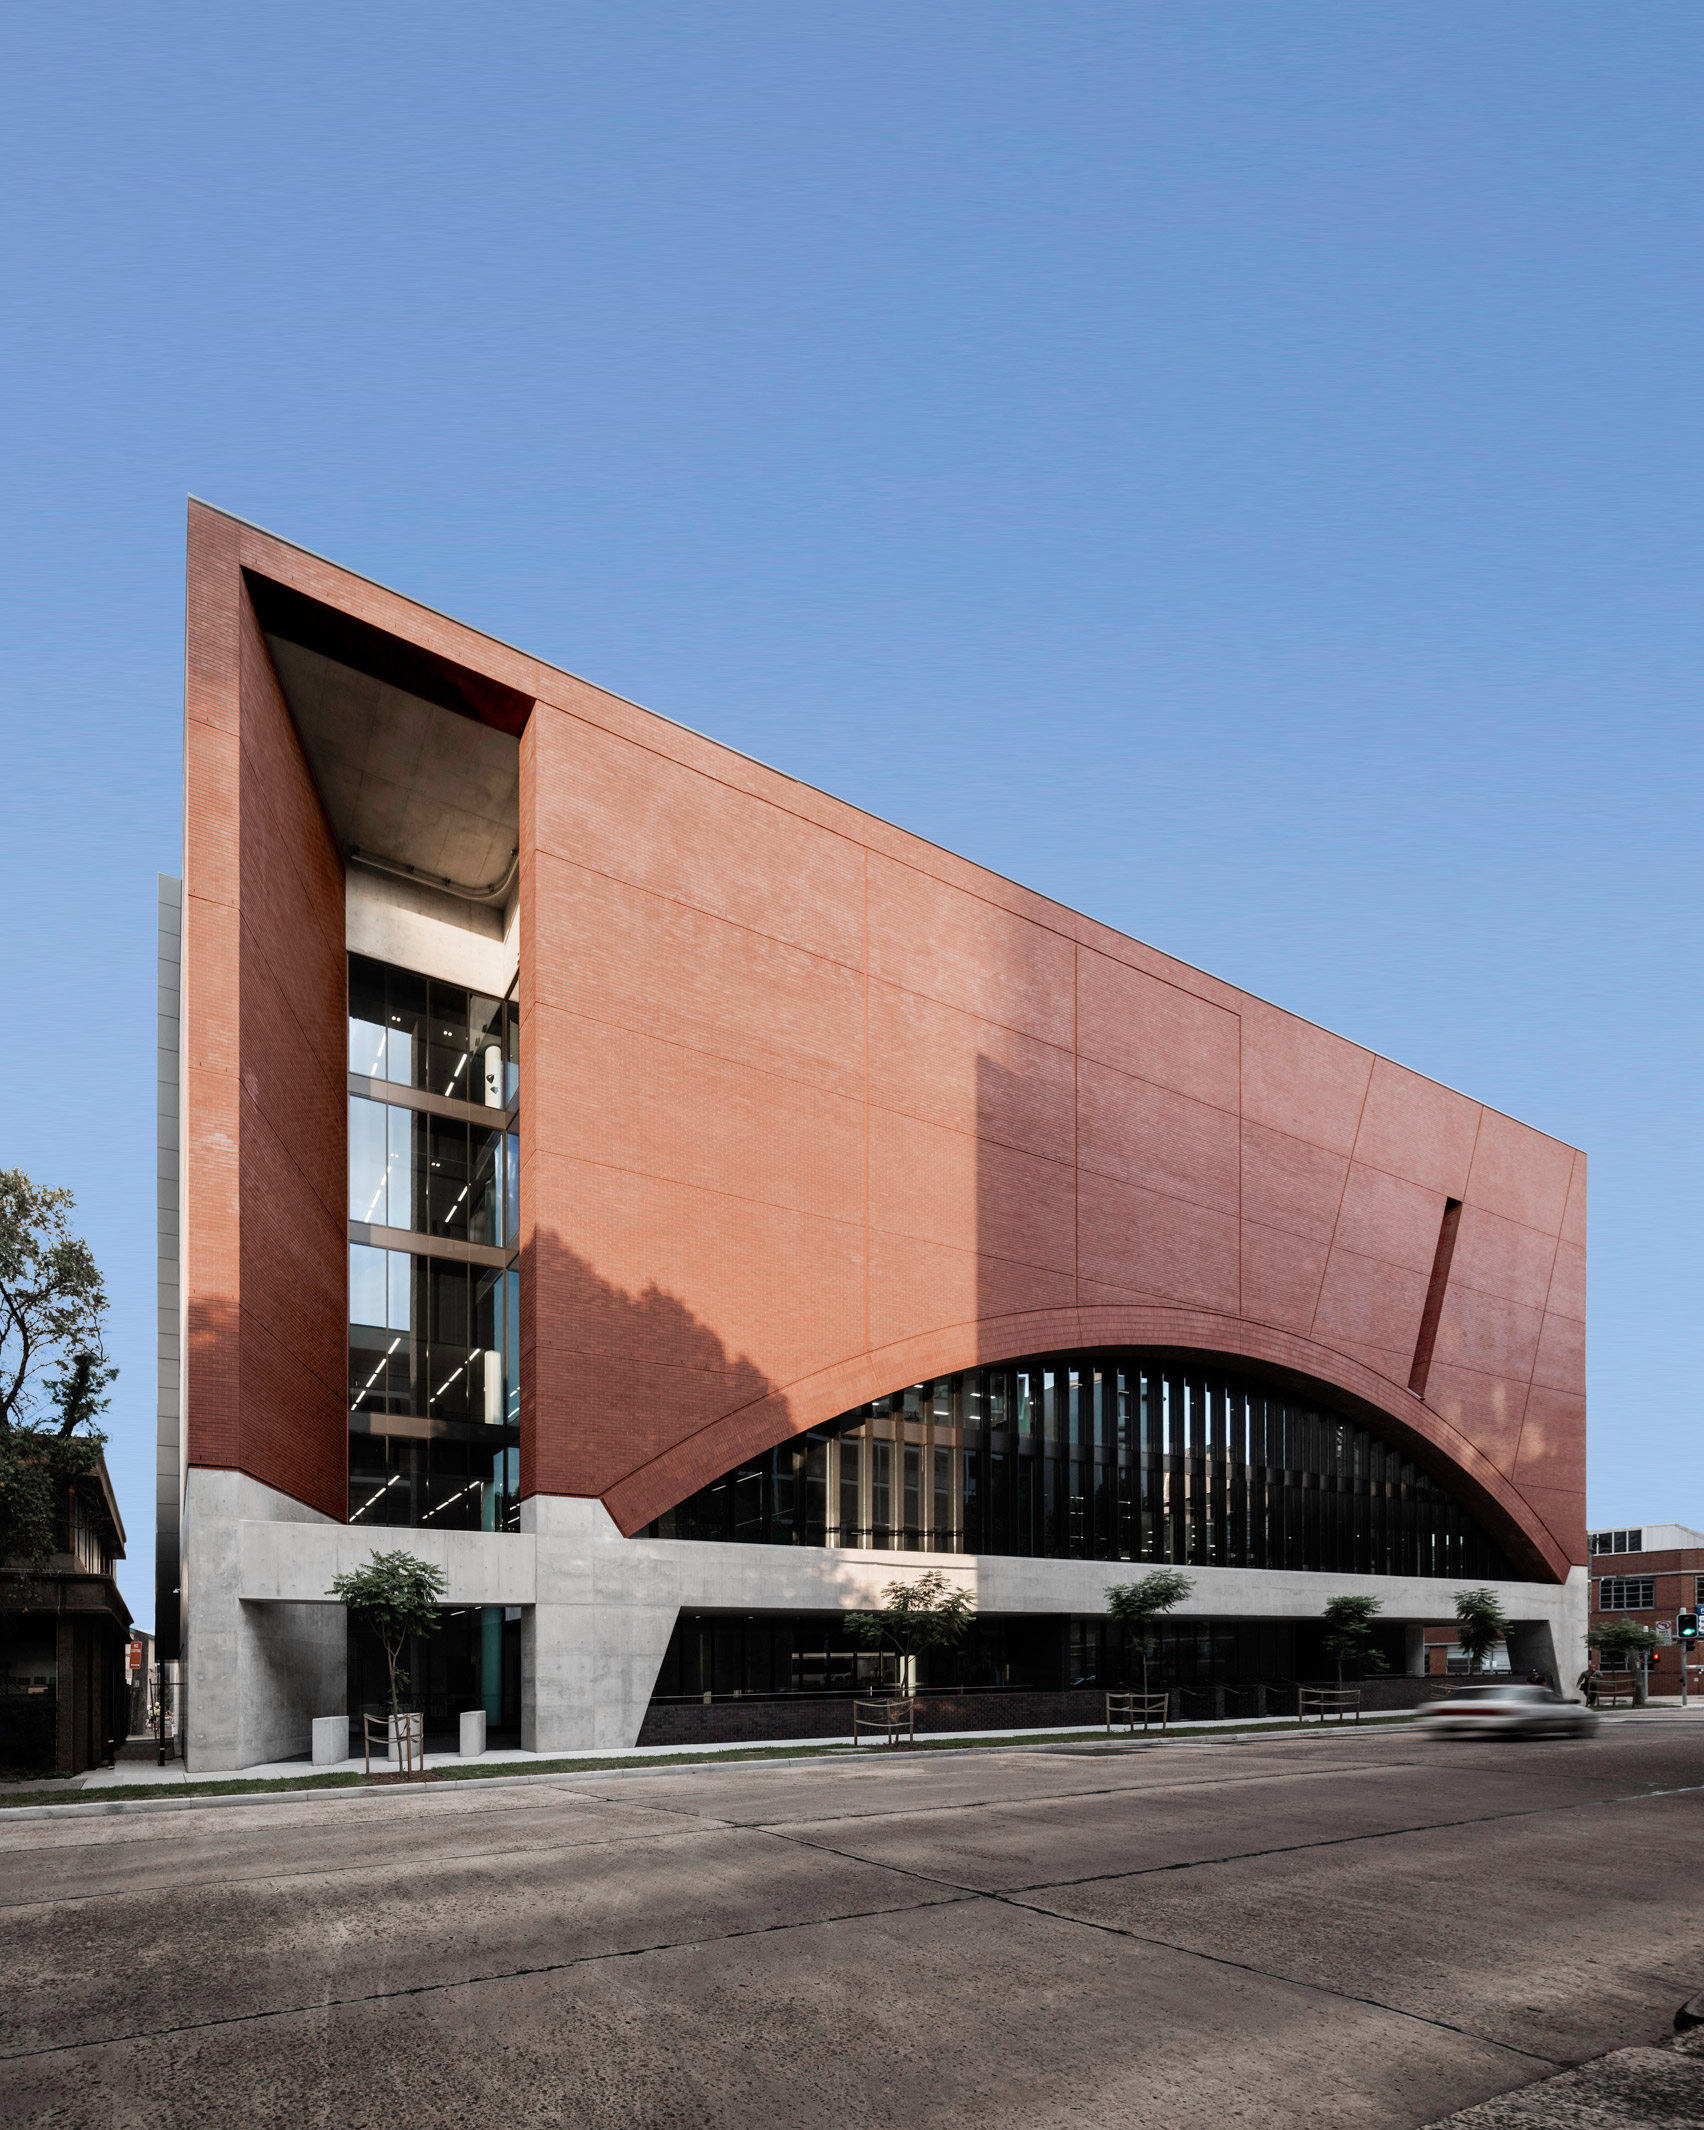 Sydney's Rail Operations Centre by Smart Design Studio and Jacobs.